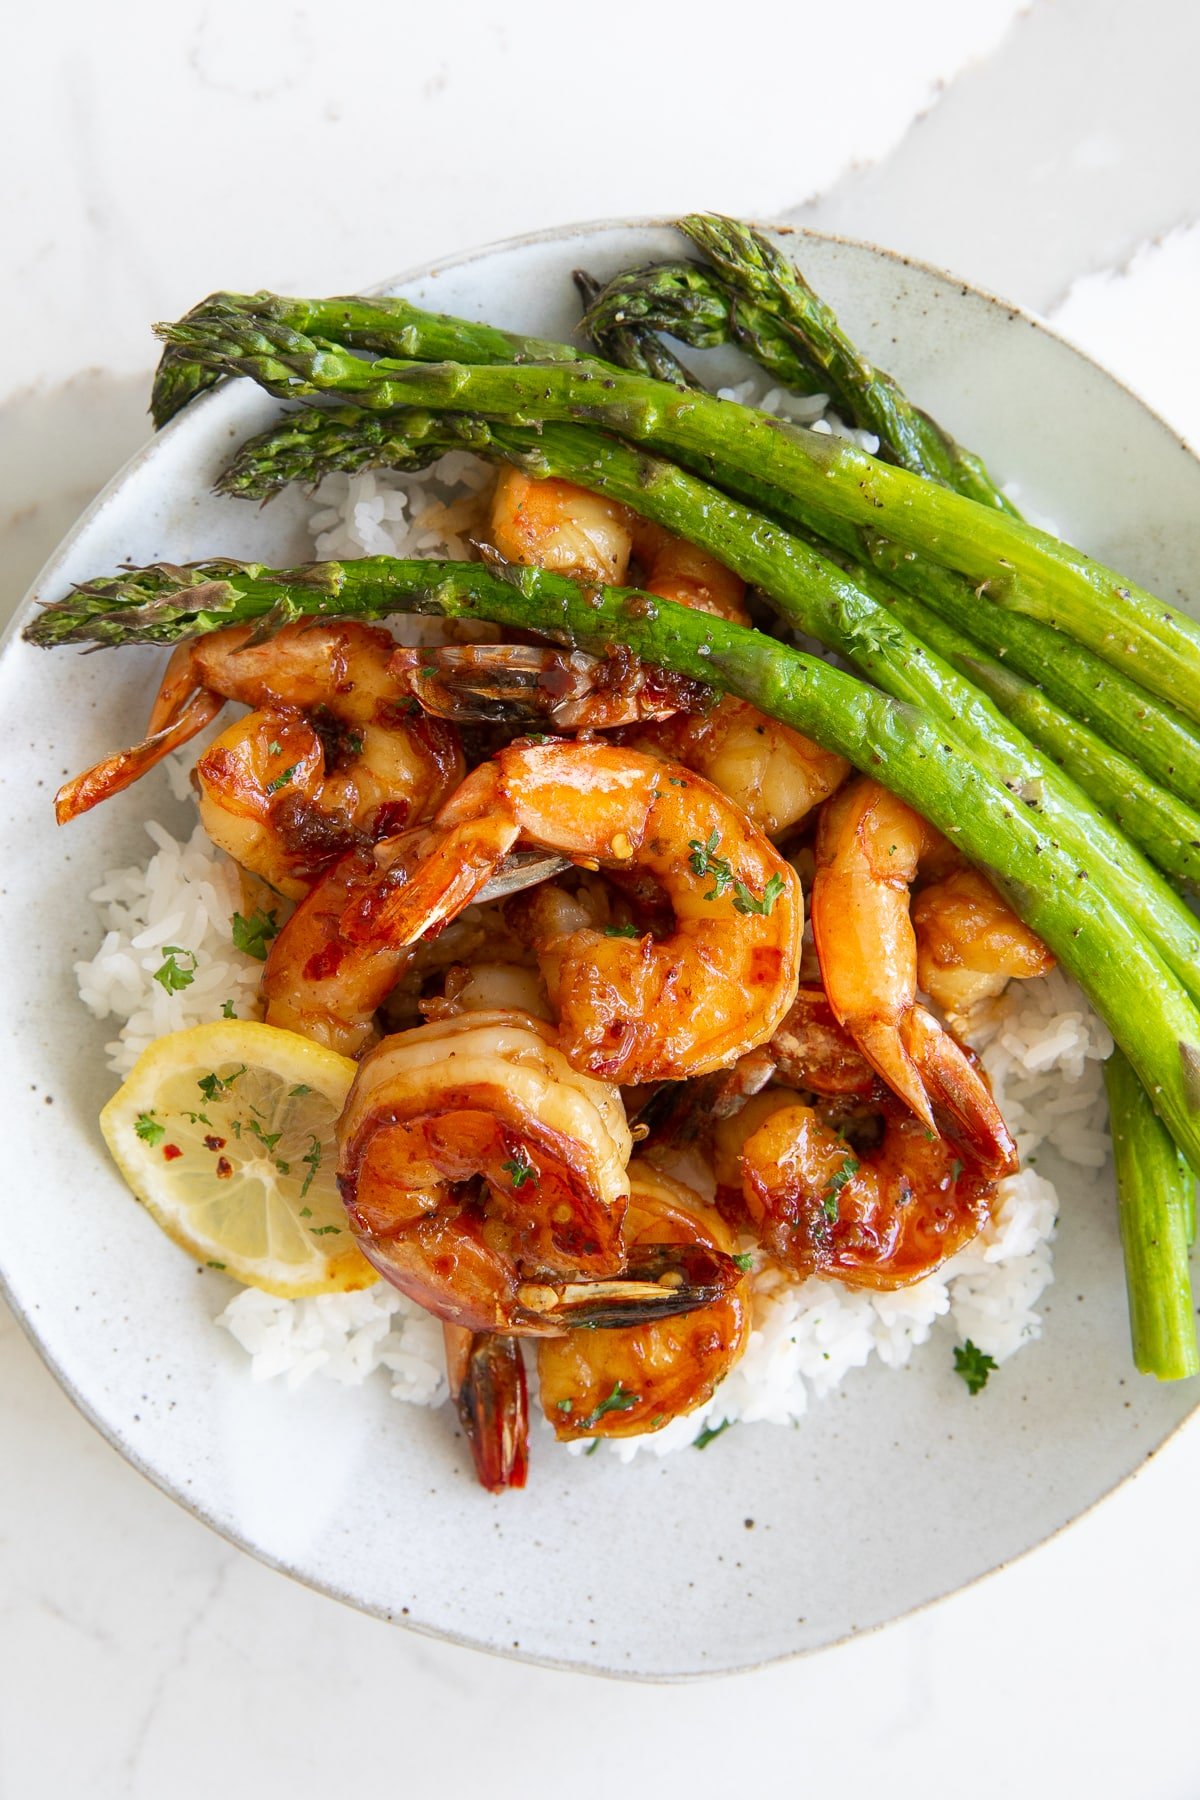 Overhead image of a white plate filled with white rice and asparagus with sweet and tangy shrimp in a honey garlic sauce.